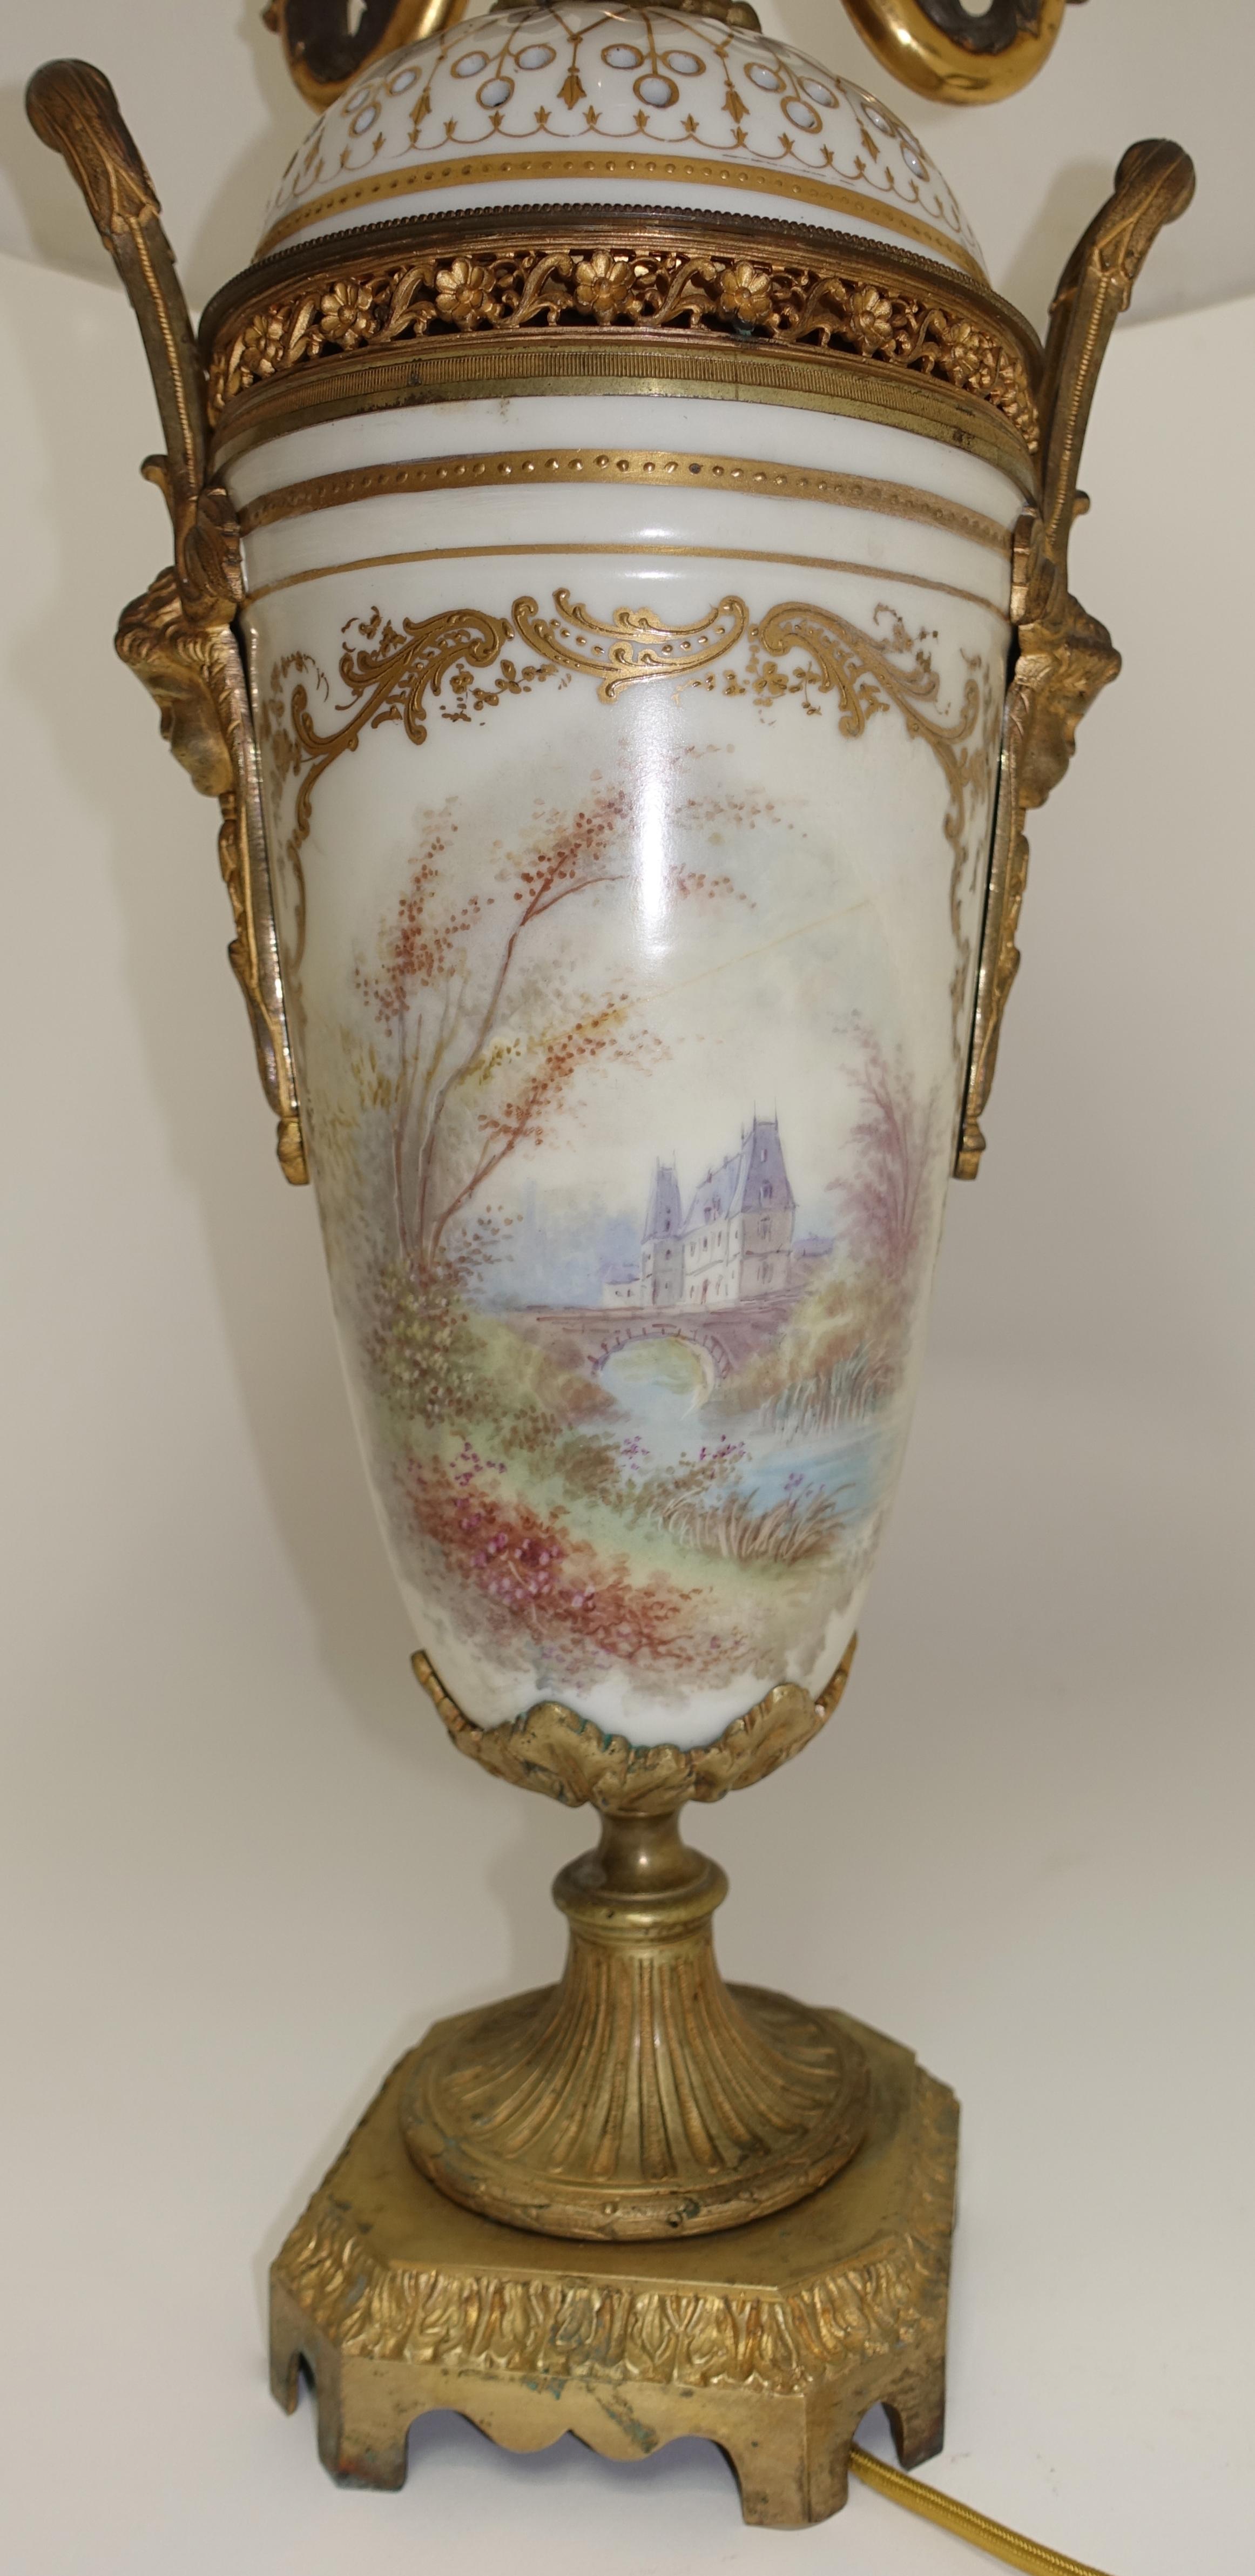 French 19th Century Sèvres Porcelain and Ormolu Covered Urn/Lamp